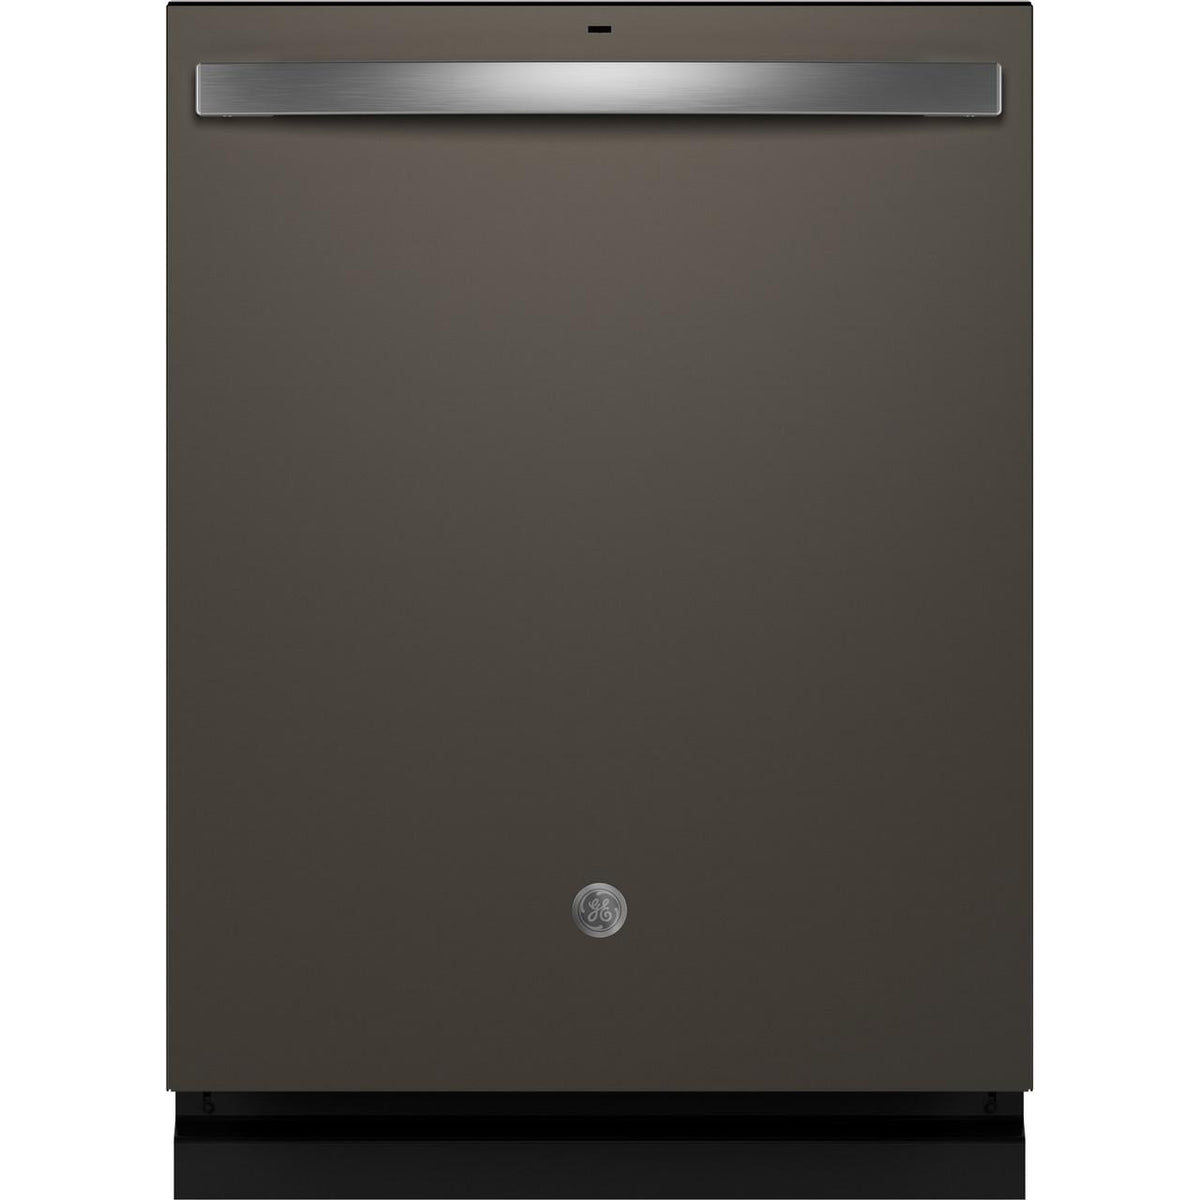 24-inch Built-in Dishwasher with Stainless Steel Tub GDT650SMVES IMAGE 1